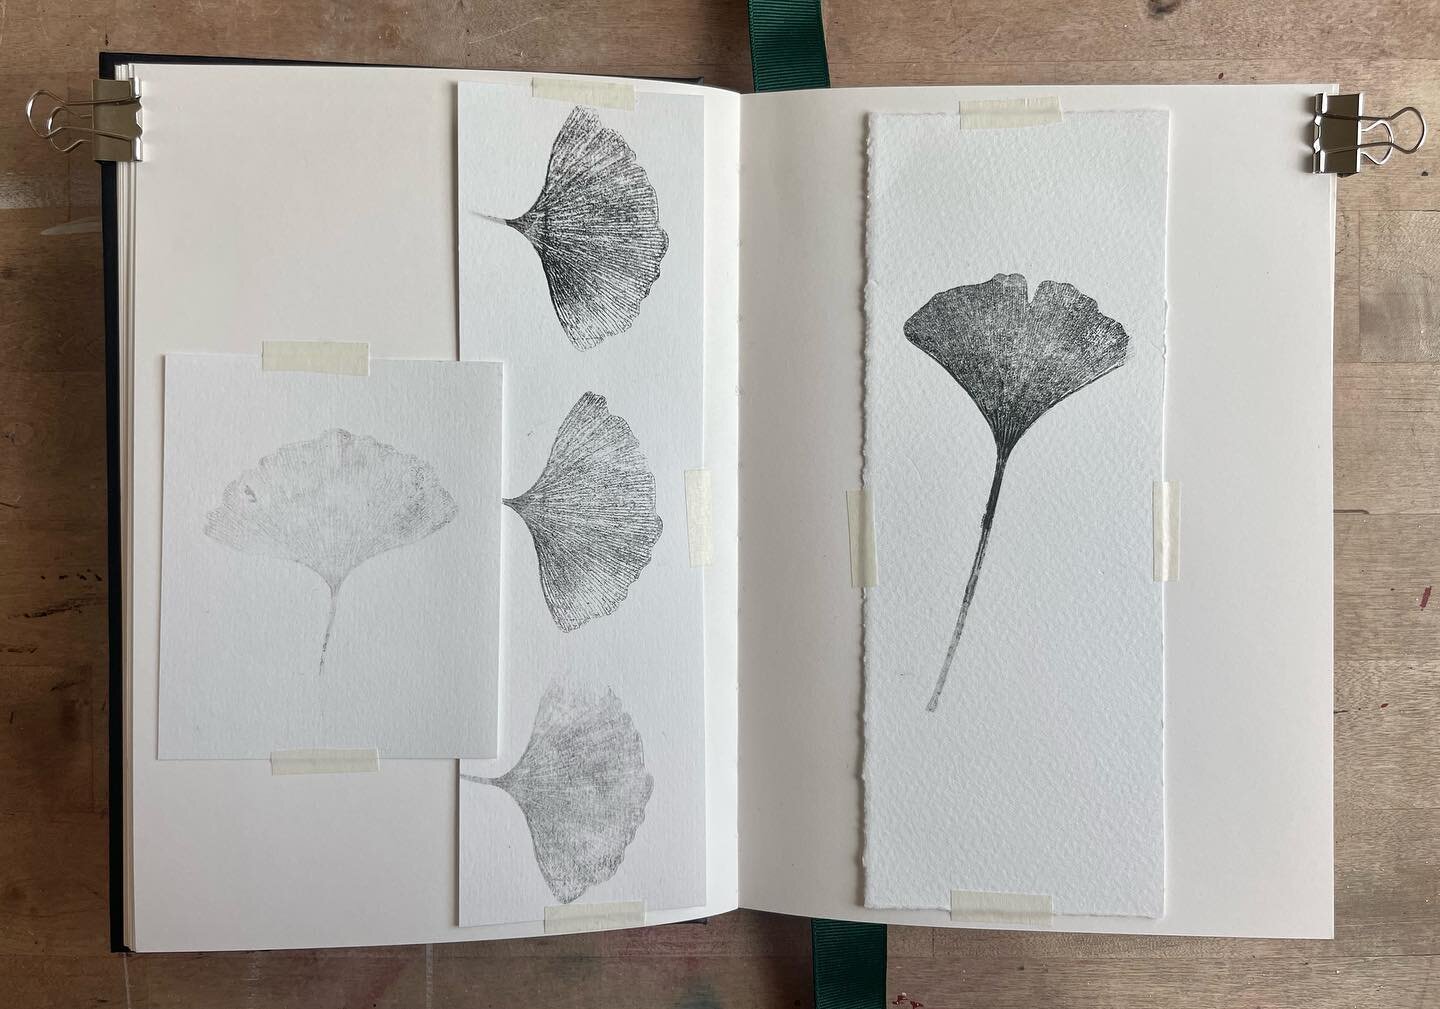 Pages from my sketchbook...

More ginkgo leaf test prints.